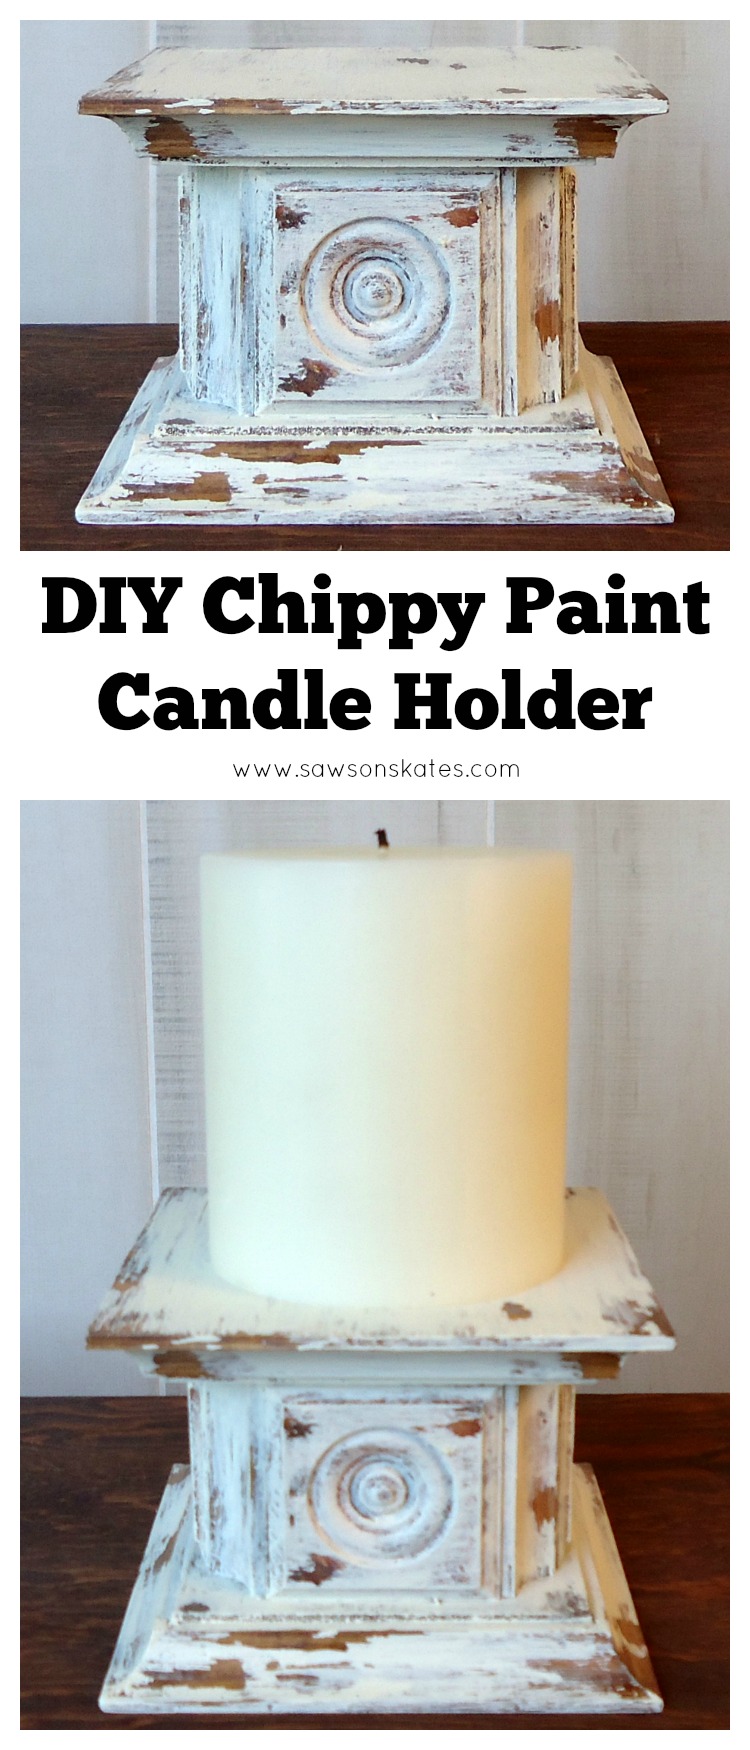 Looking for easy DIY candle holder ideas? Look no further than this antique style pillar candle holder featuring wooden rosettes and a chippy paint finish! Make it for yourself or give as a gift.